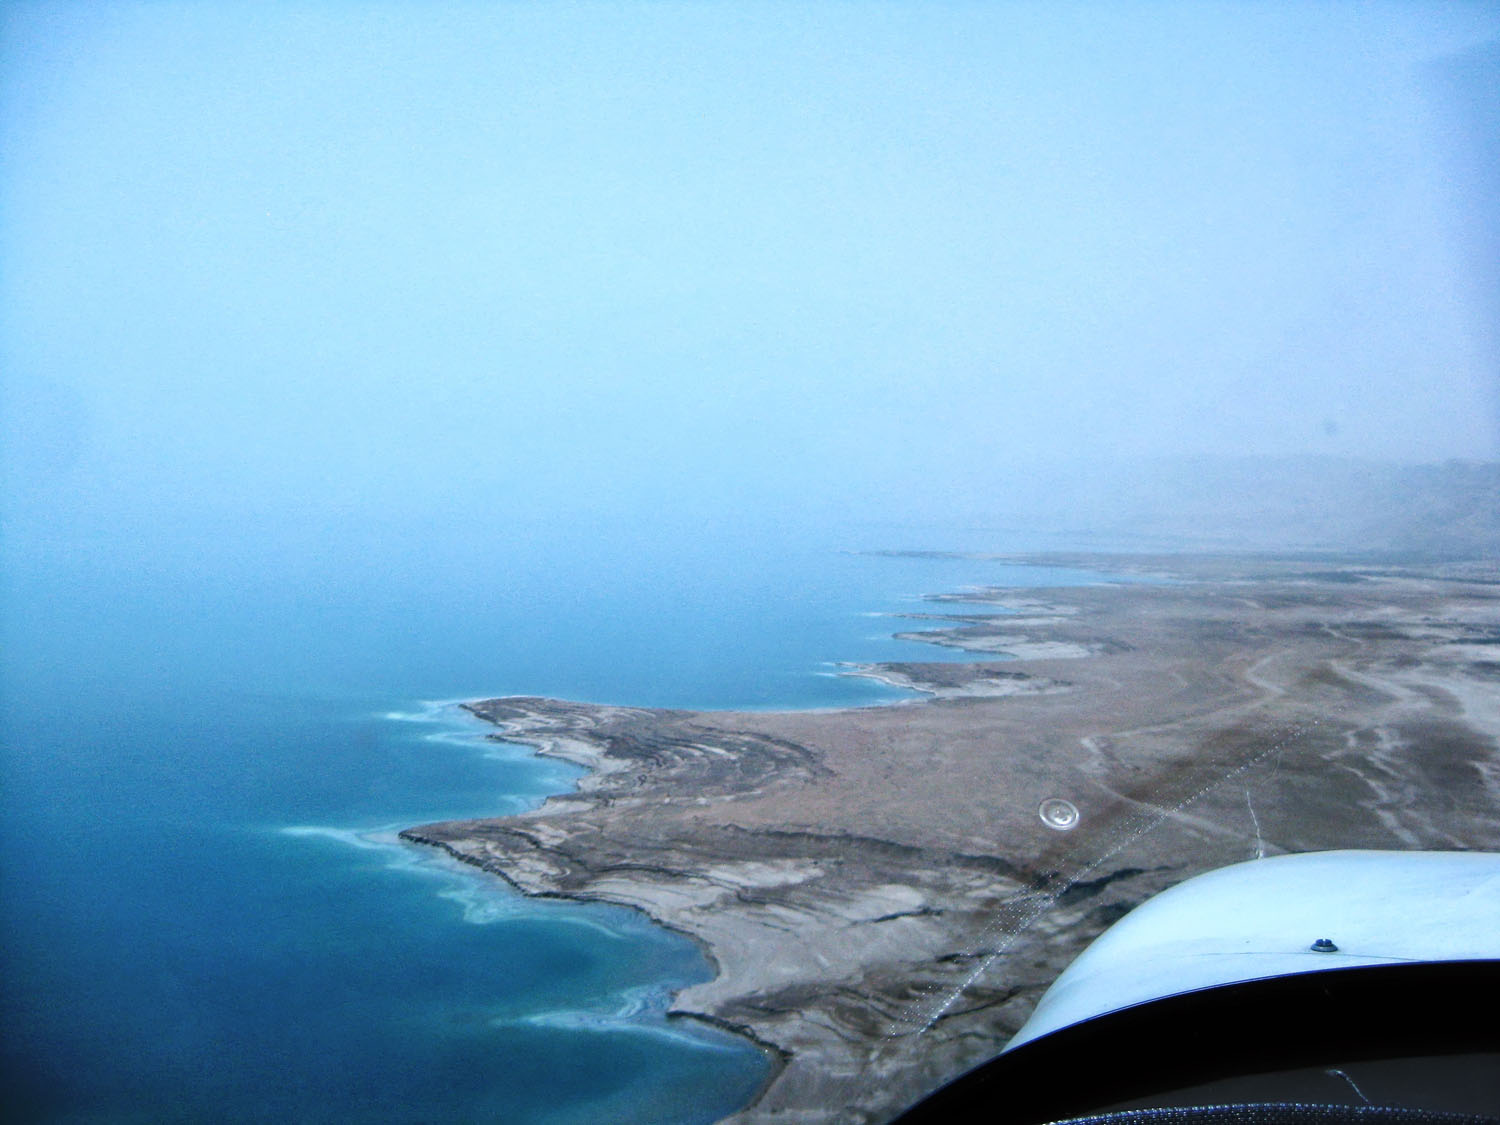 Flying along the west coast of the Dead Sea.